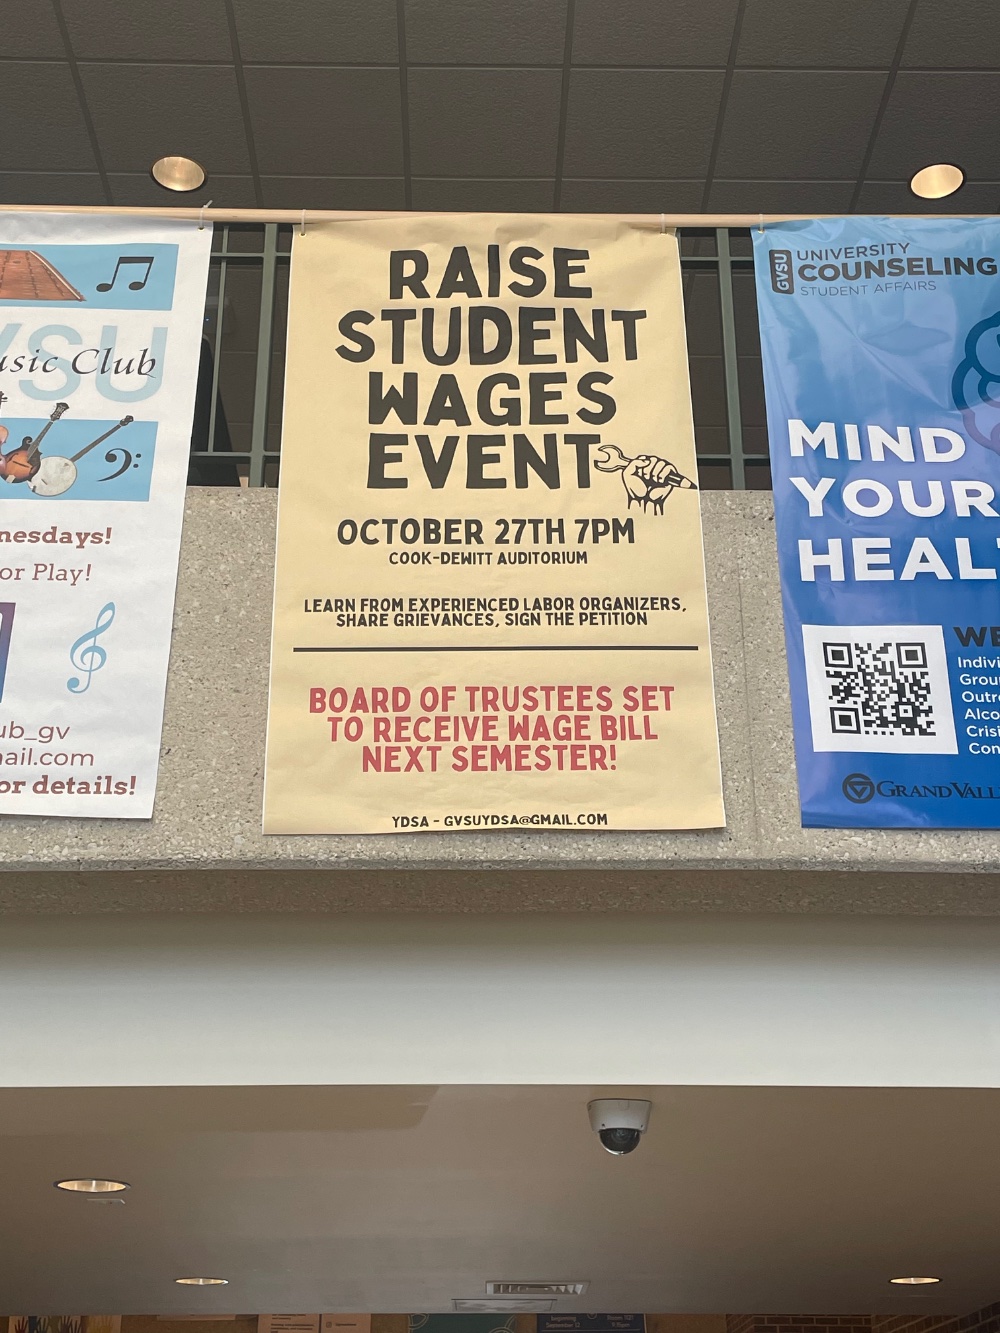 Raise Student Wages Event Poster seen in Kirkhof